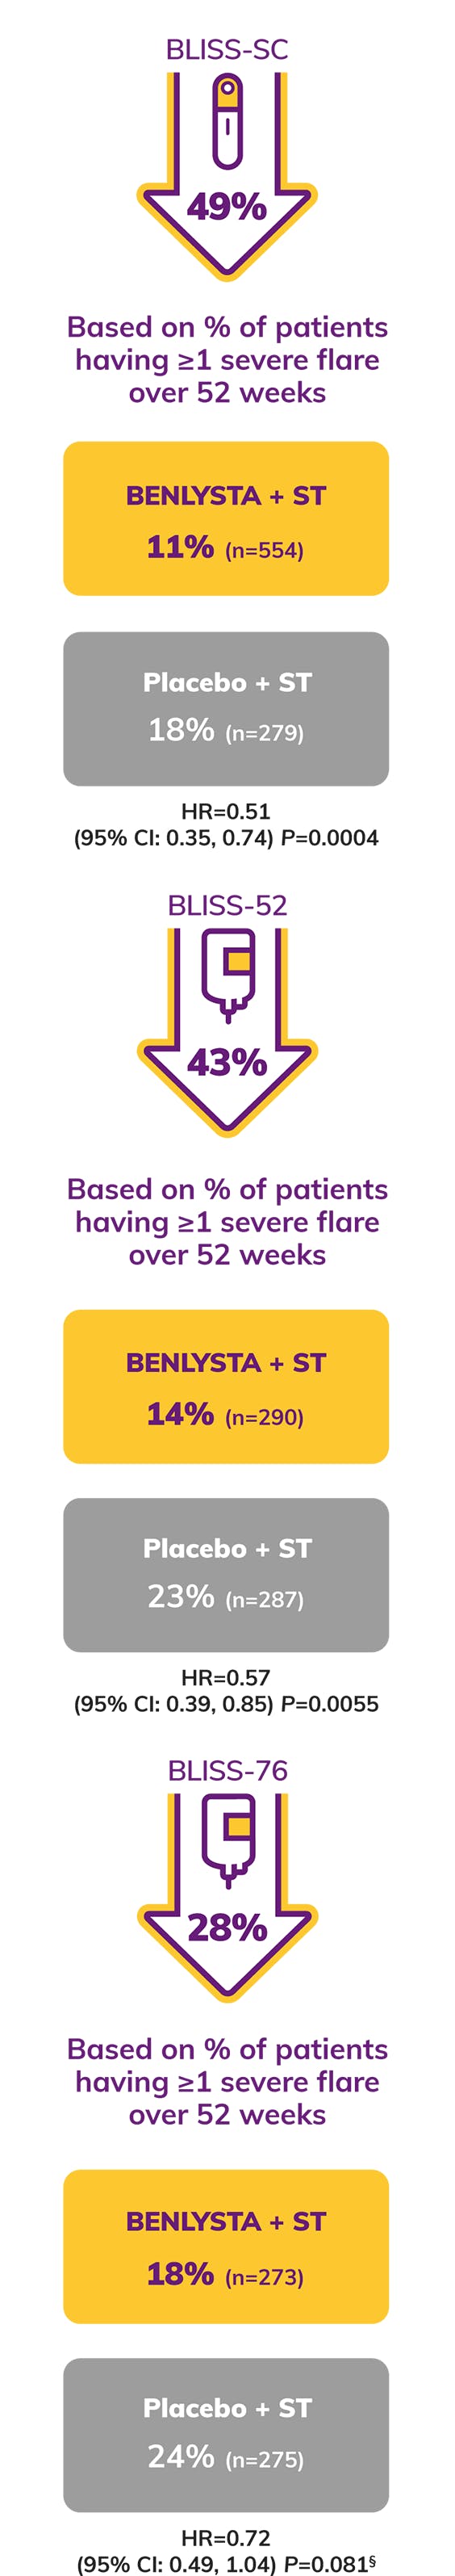 Icon: Reduction in Severe Flares Shows 49% for Bliss SC, 43% for Bliss 52, 28% for Bliss 76